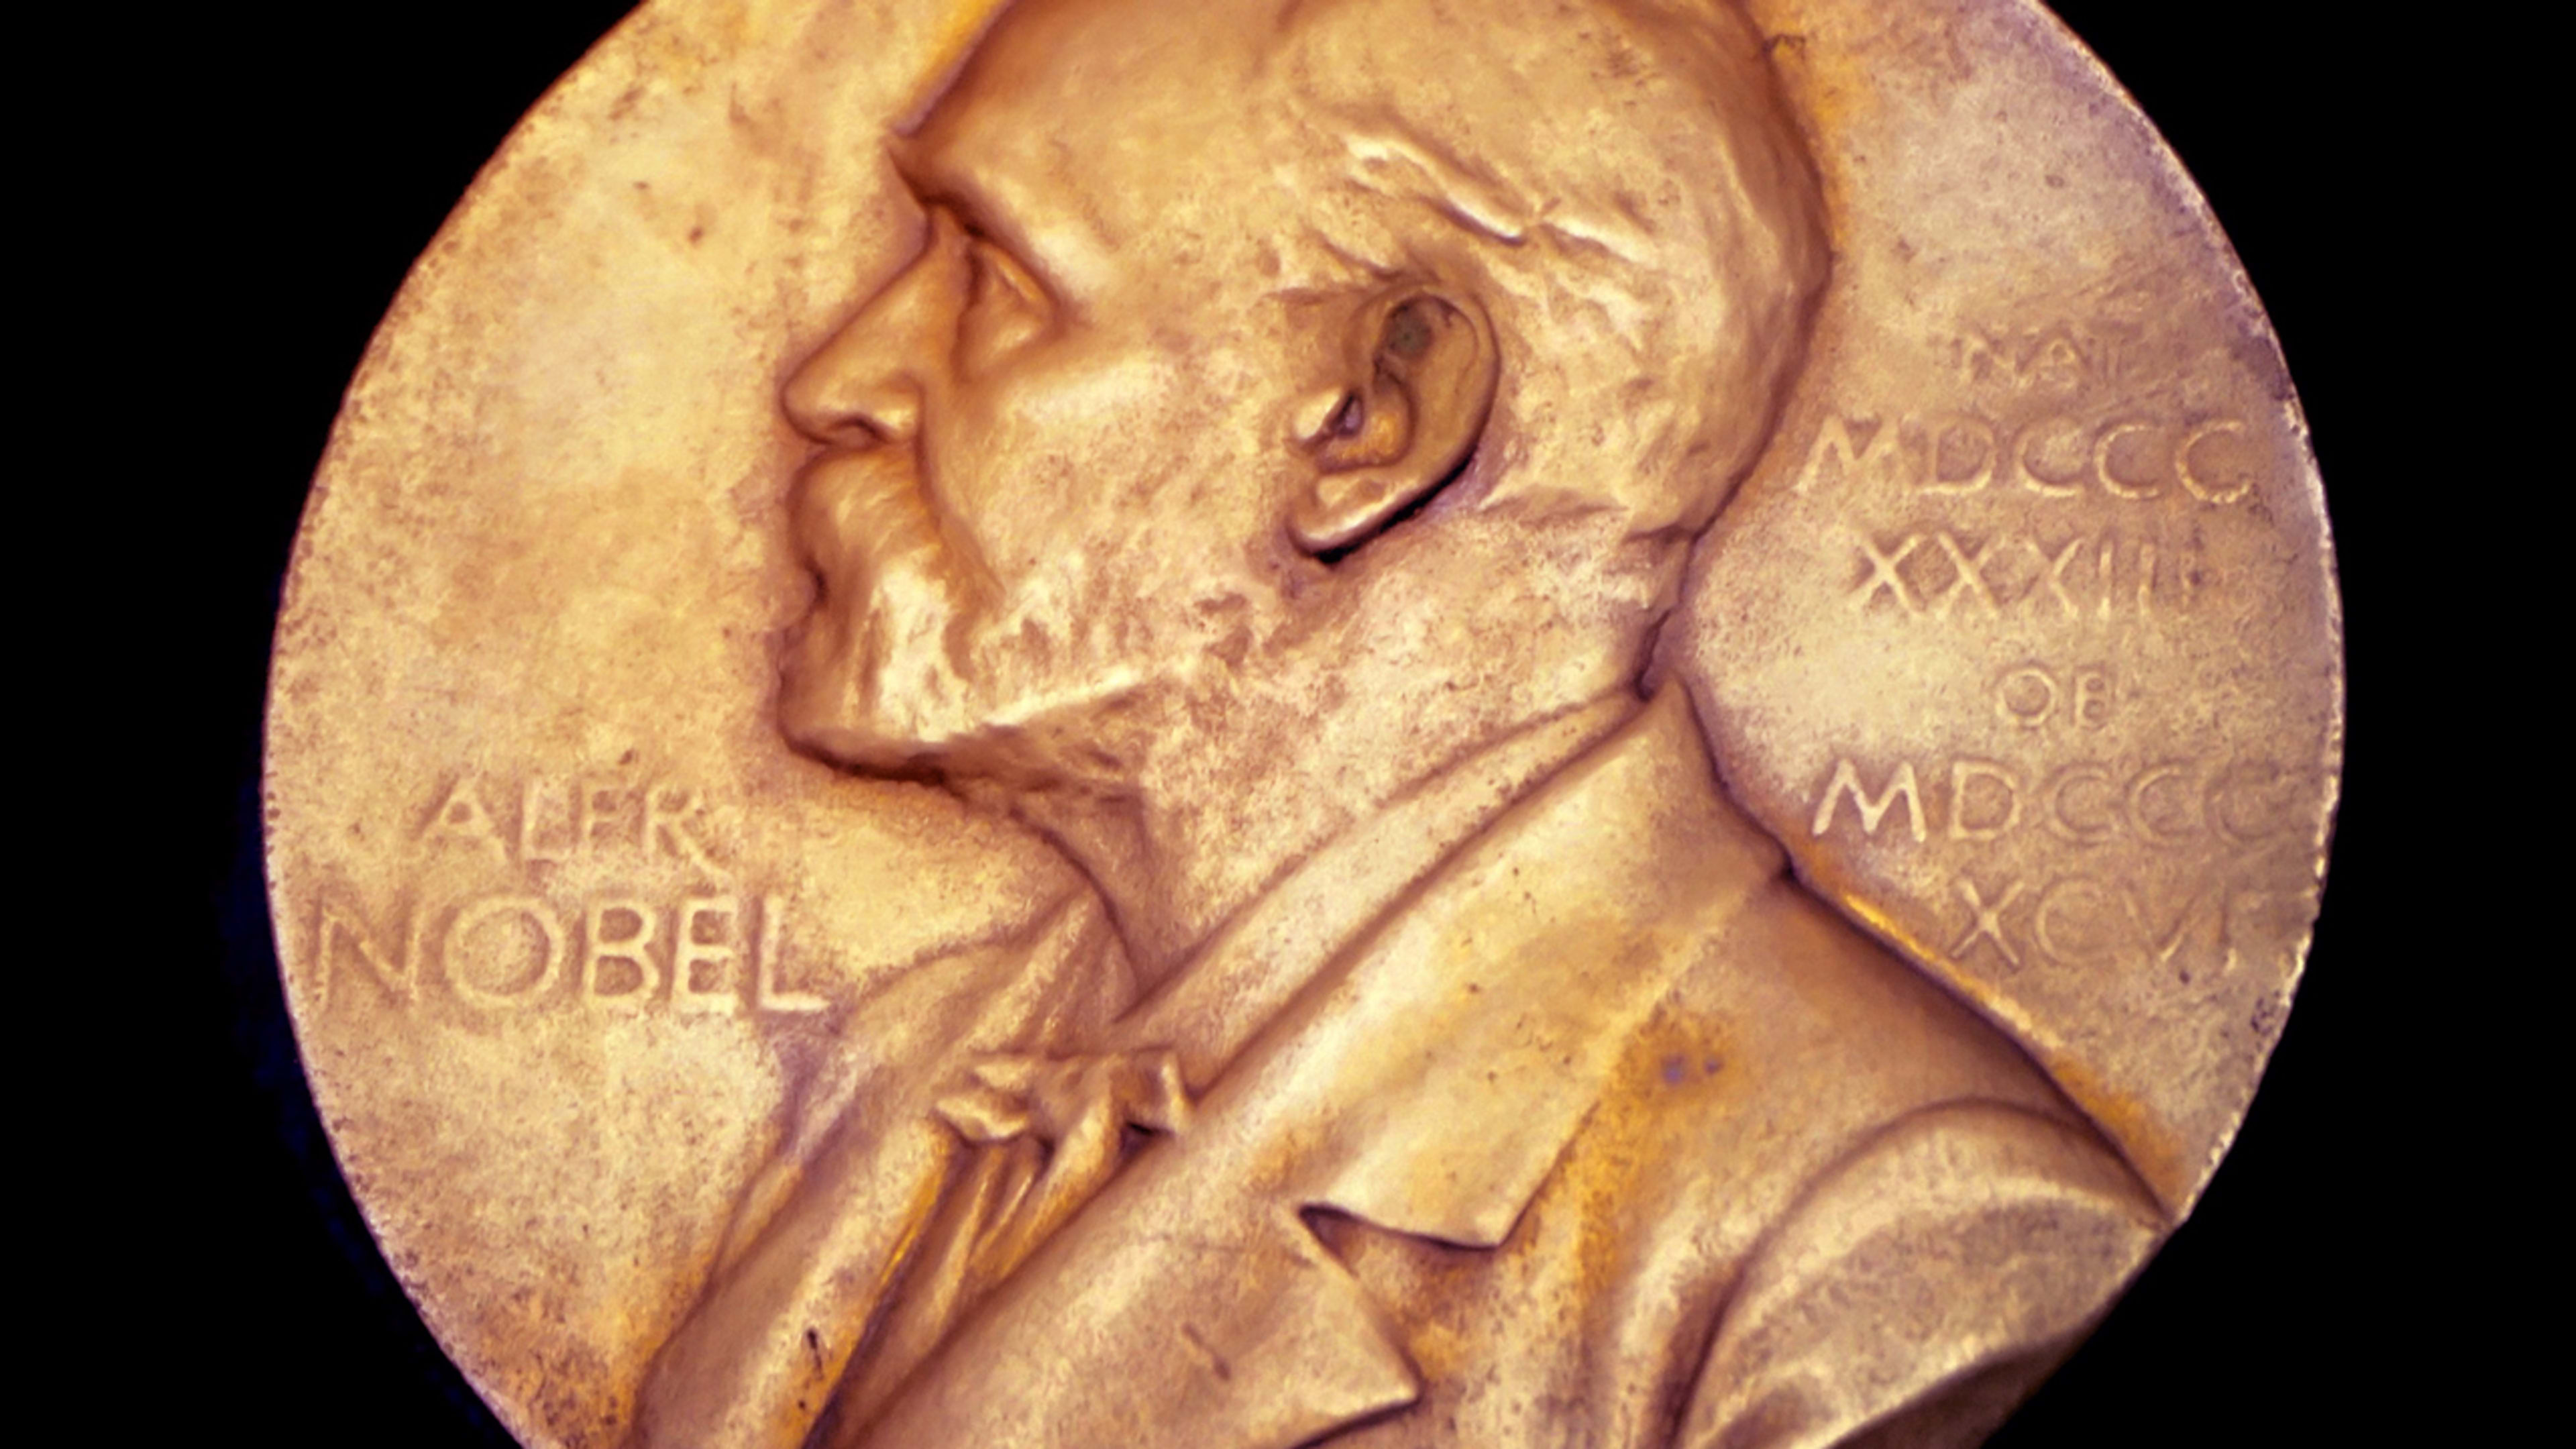 The Nobel Prize in literature isn’t happening this year